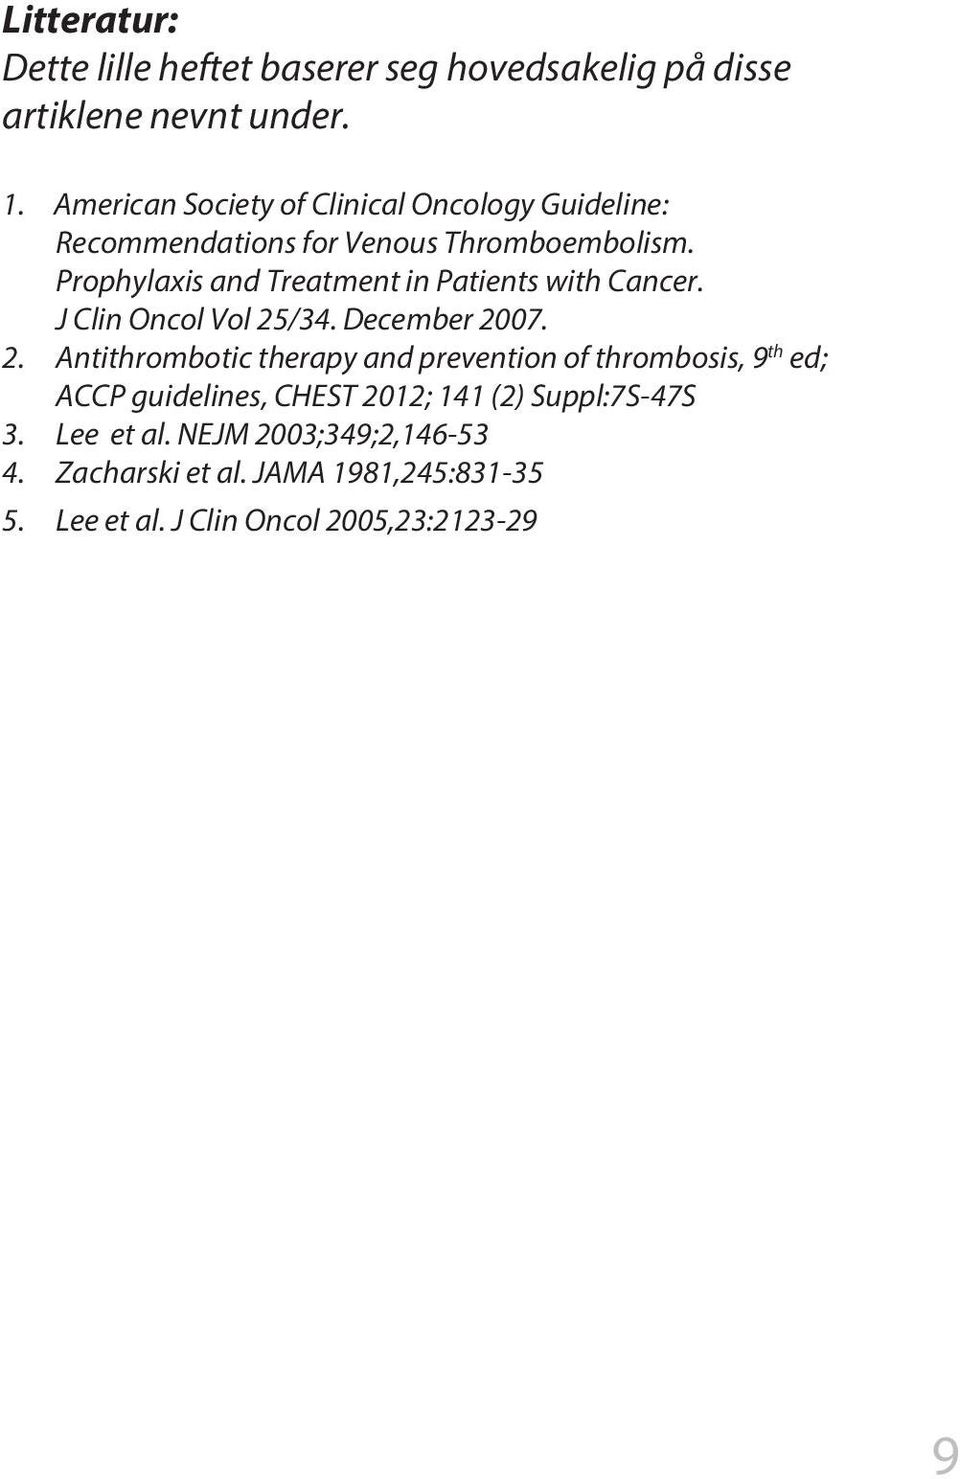 Prophylaxis and Treatment in Patients with Cancer. J Clin Oncol Vol 25